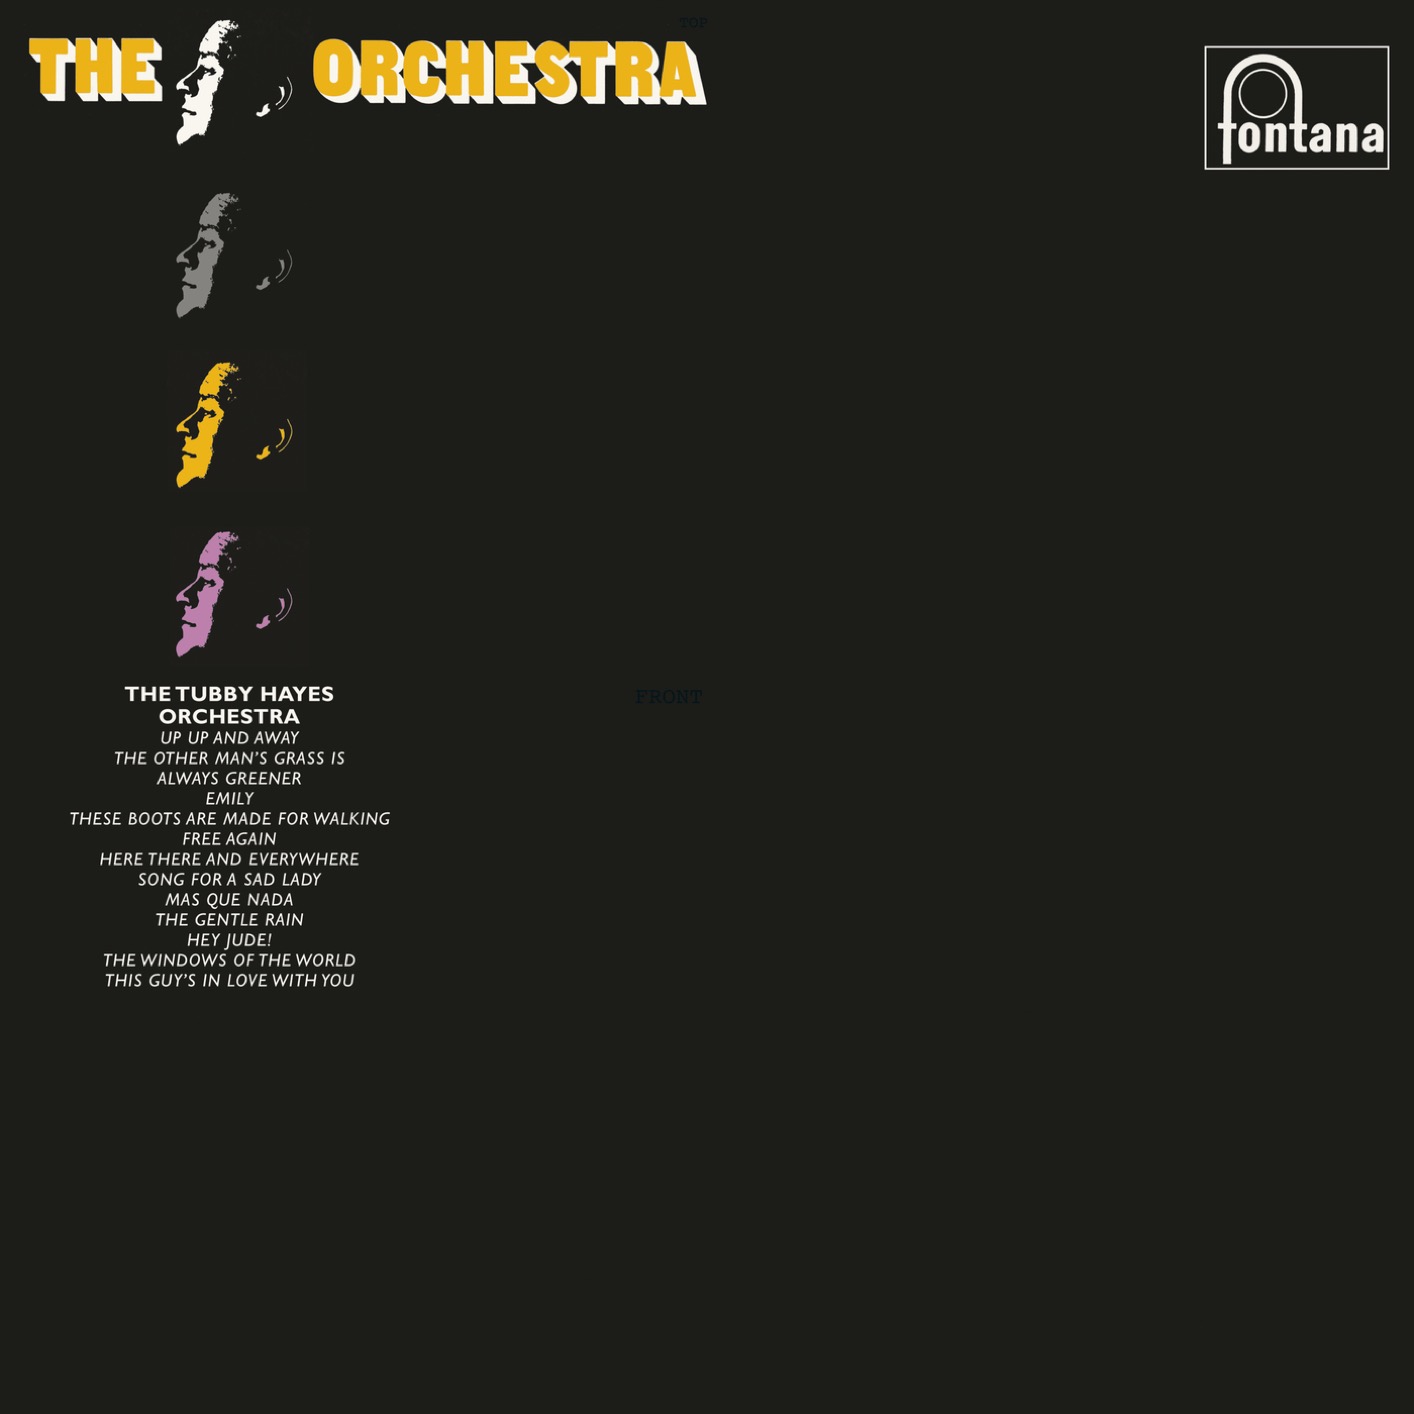 The Tubby Hayes Orchestra – The Orchestra (Remastered) (1970/2019) [FLAC 24bit/88,2kHz]